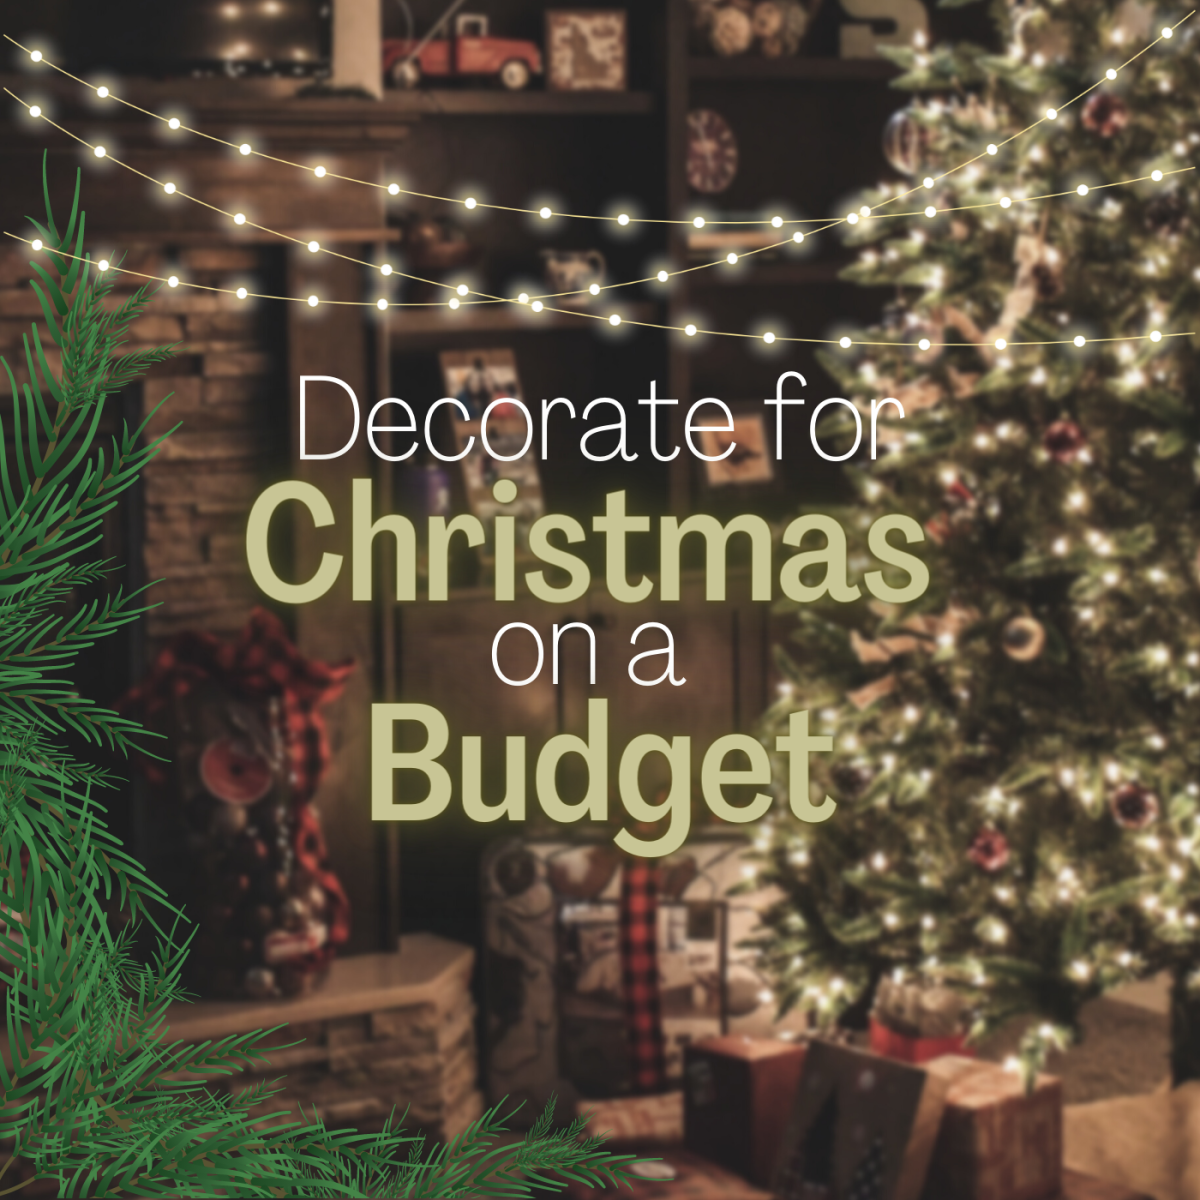 18 Ideas to Decorate Your Home for Christmas on a Budget